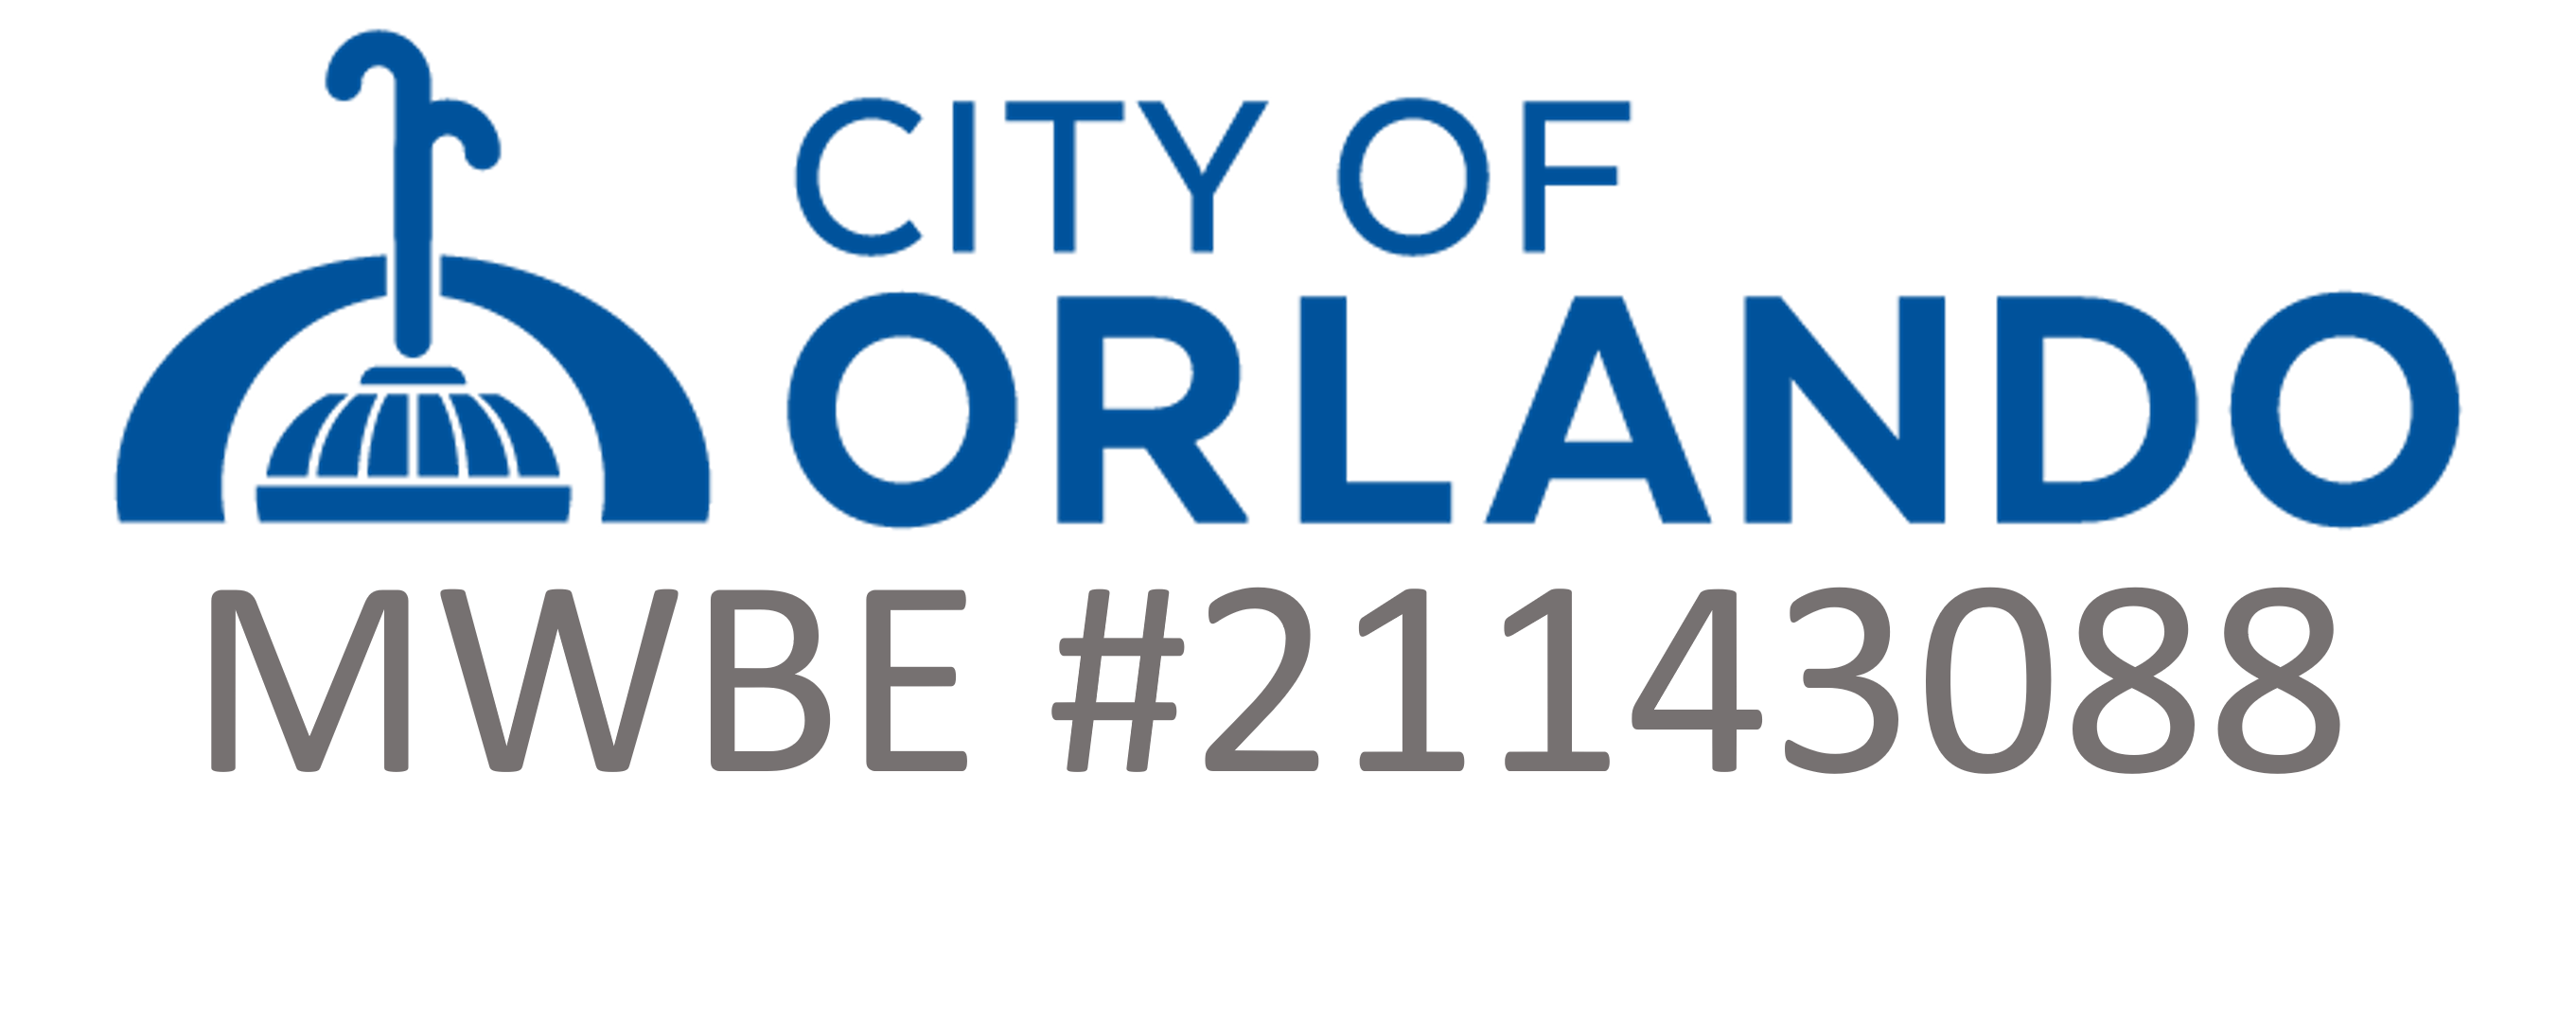 https://anuvisiontech.com/wp-content/uploads/2022/04/City-of-Orlando-MWBE.png